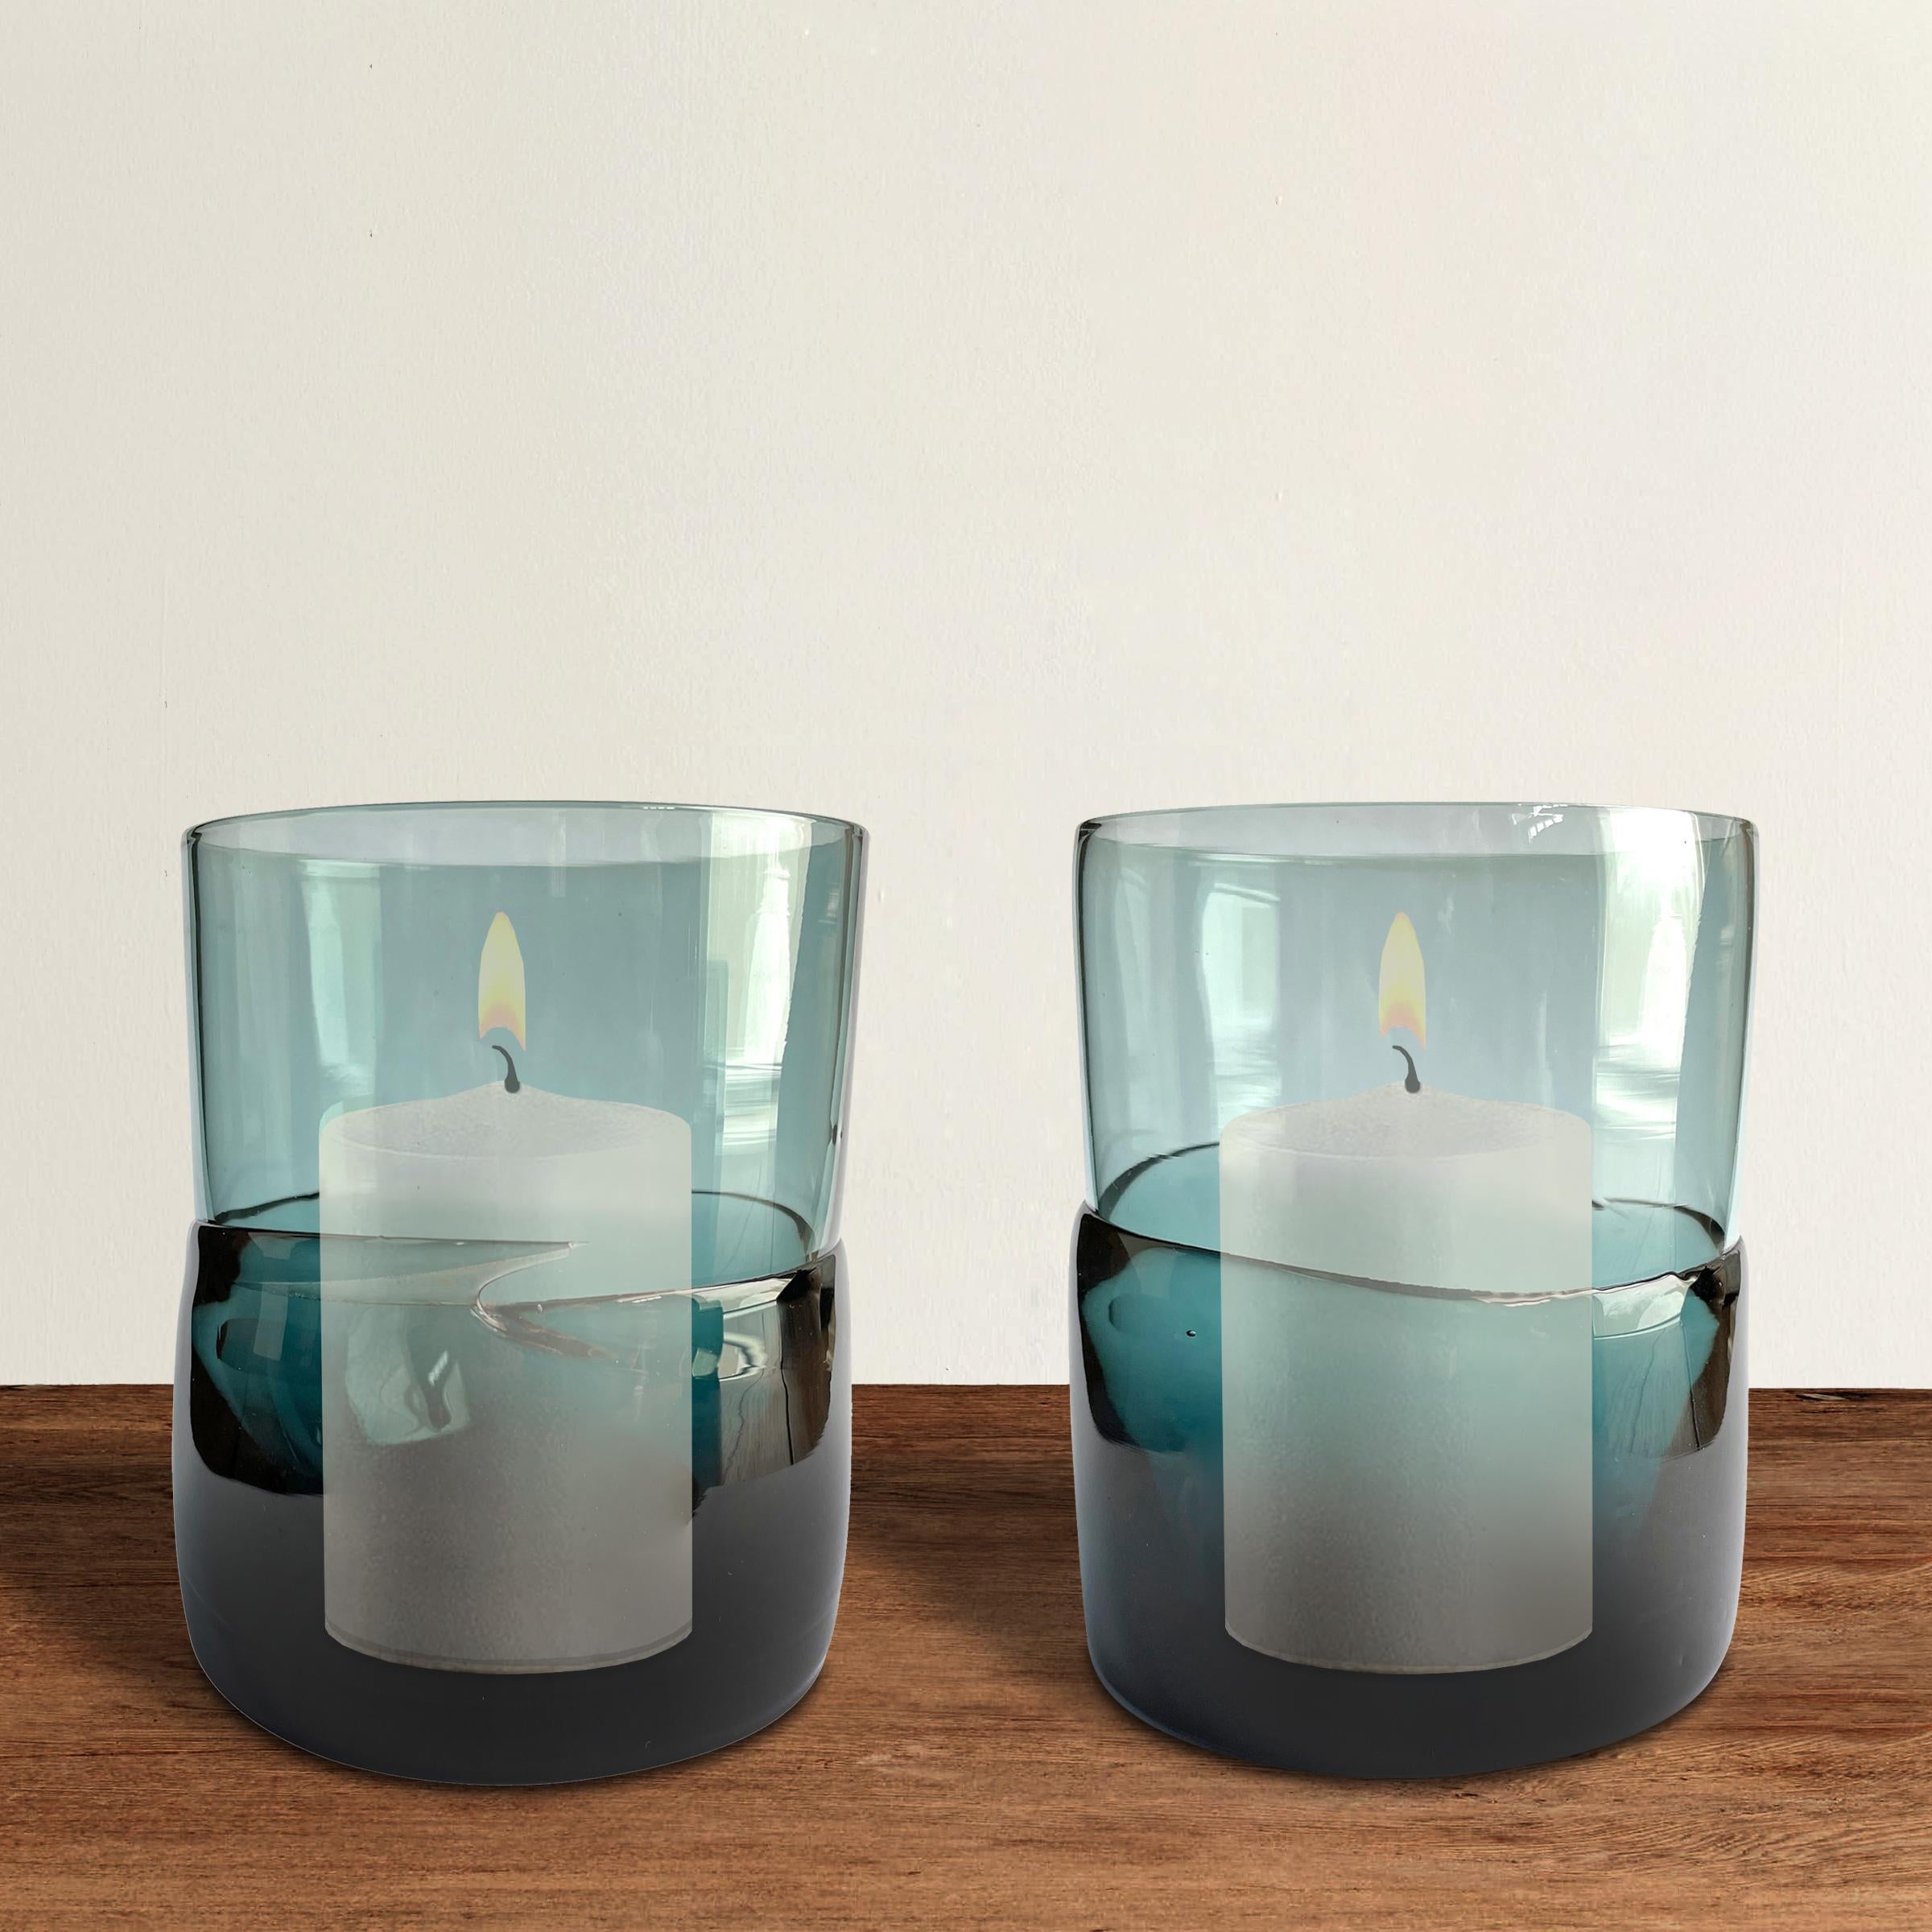 A fabulous pair of blown glass-votive candle hurricanes with heavy slump glass bases in a beautiful teal blue color. Perfect for candles, but also work well as small vases for your dining table or on a mantle.